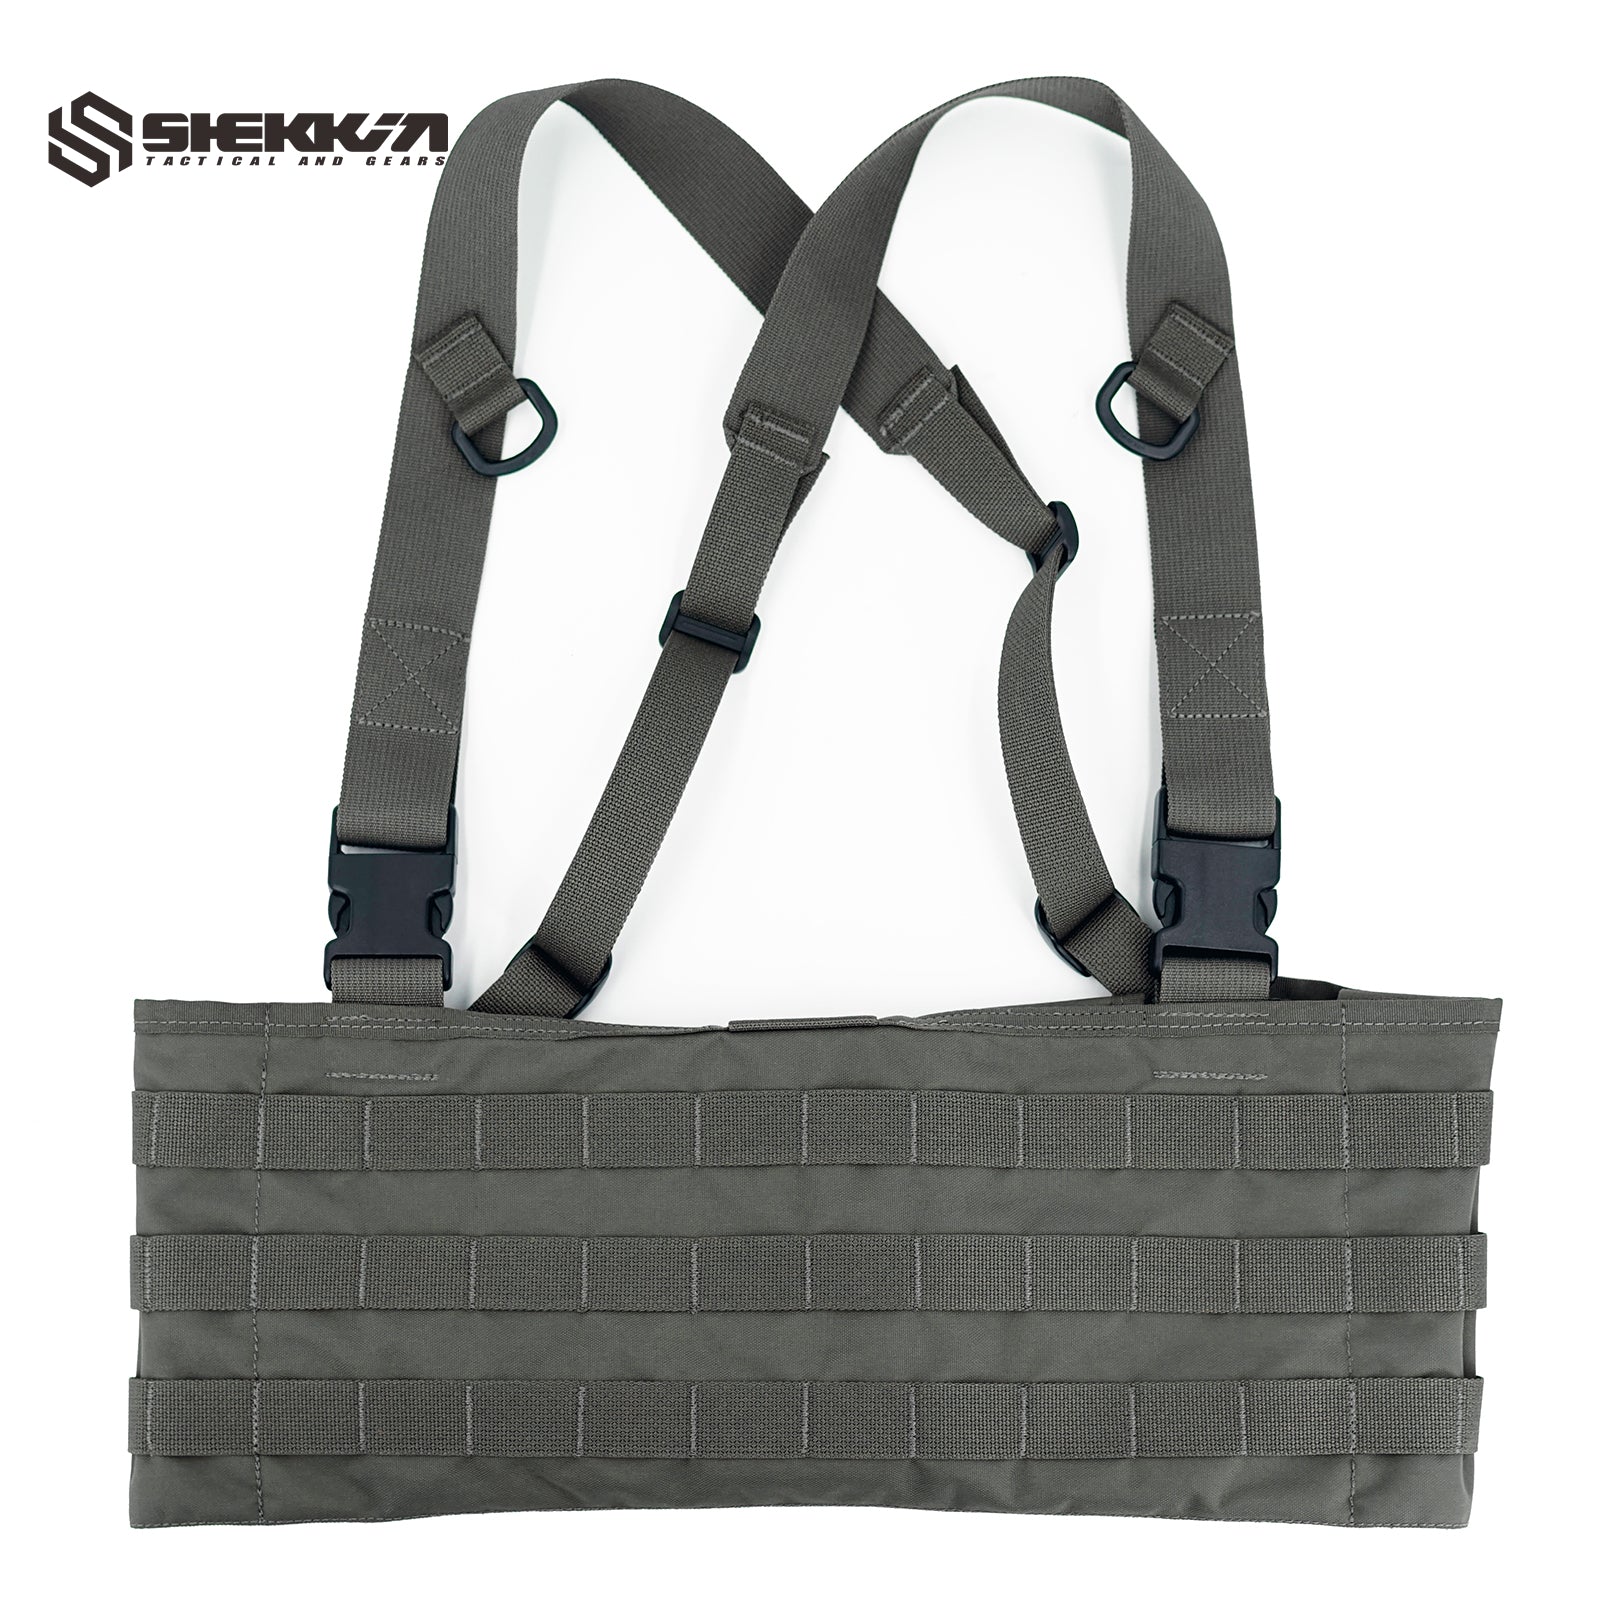 Paraclete Pre MSA style Rack Chest Rig - Shekkin Gears